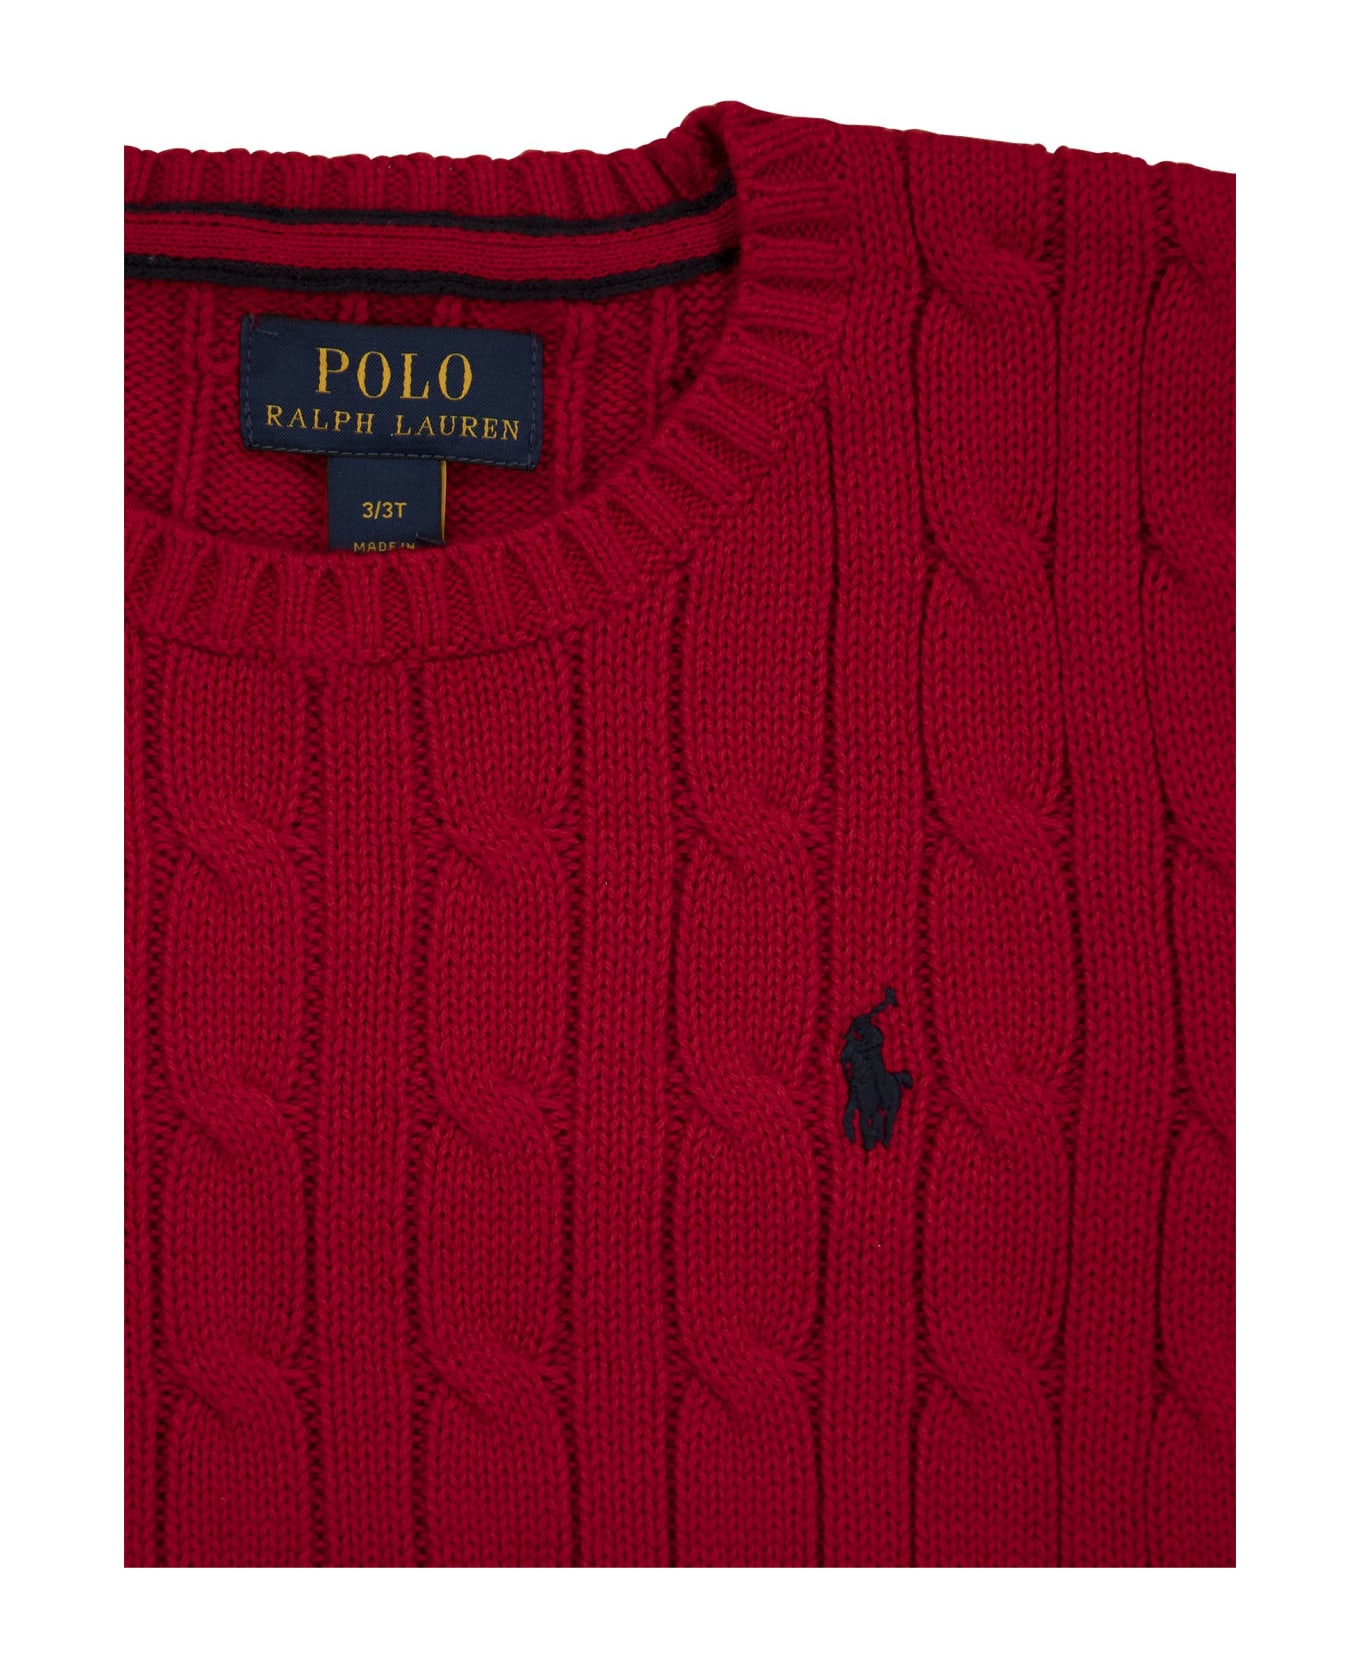 Polo Ralph Lauren Crew-neck Cotton Cable-knit Sweater - Red